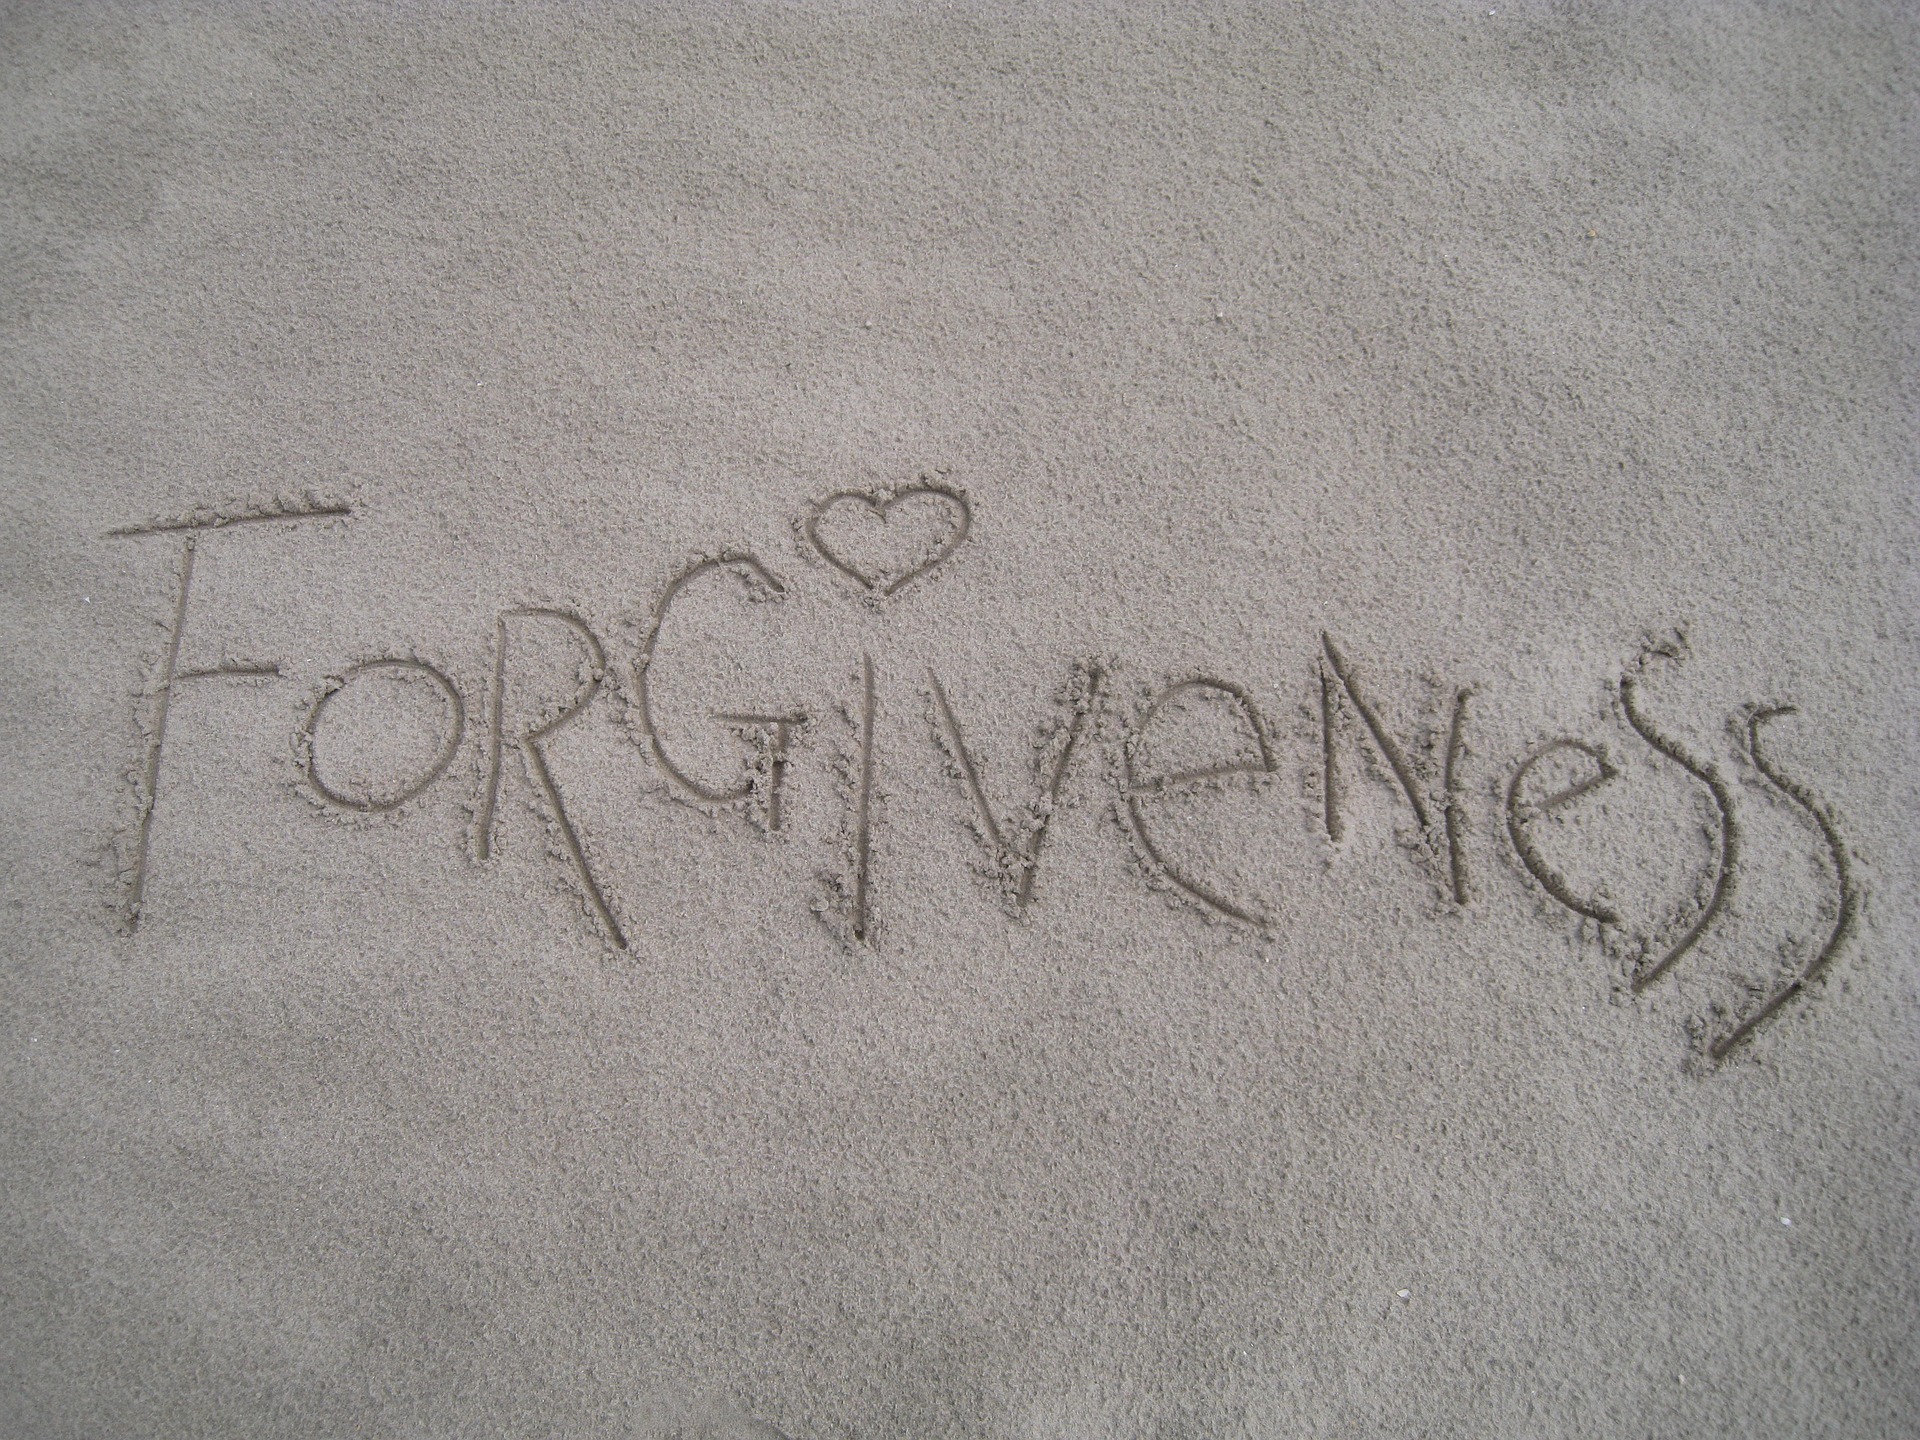 What is Keeping You From Making a Decision To Forgive?